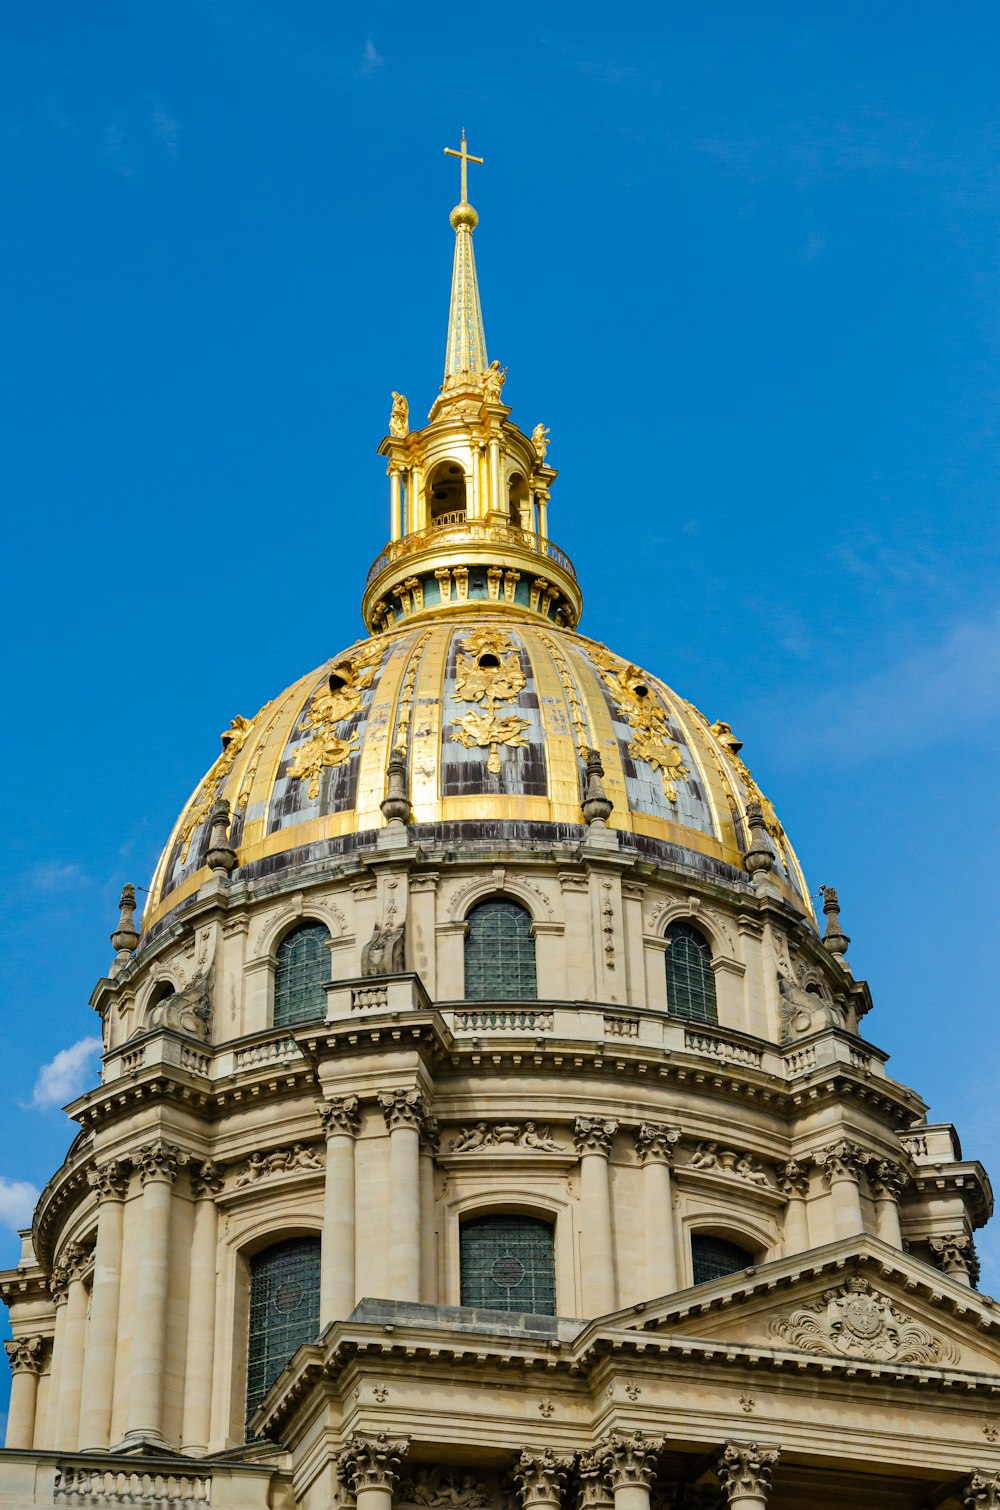 the dome of a building with a golden cross on top